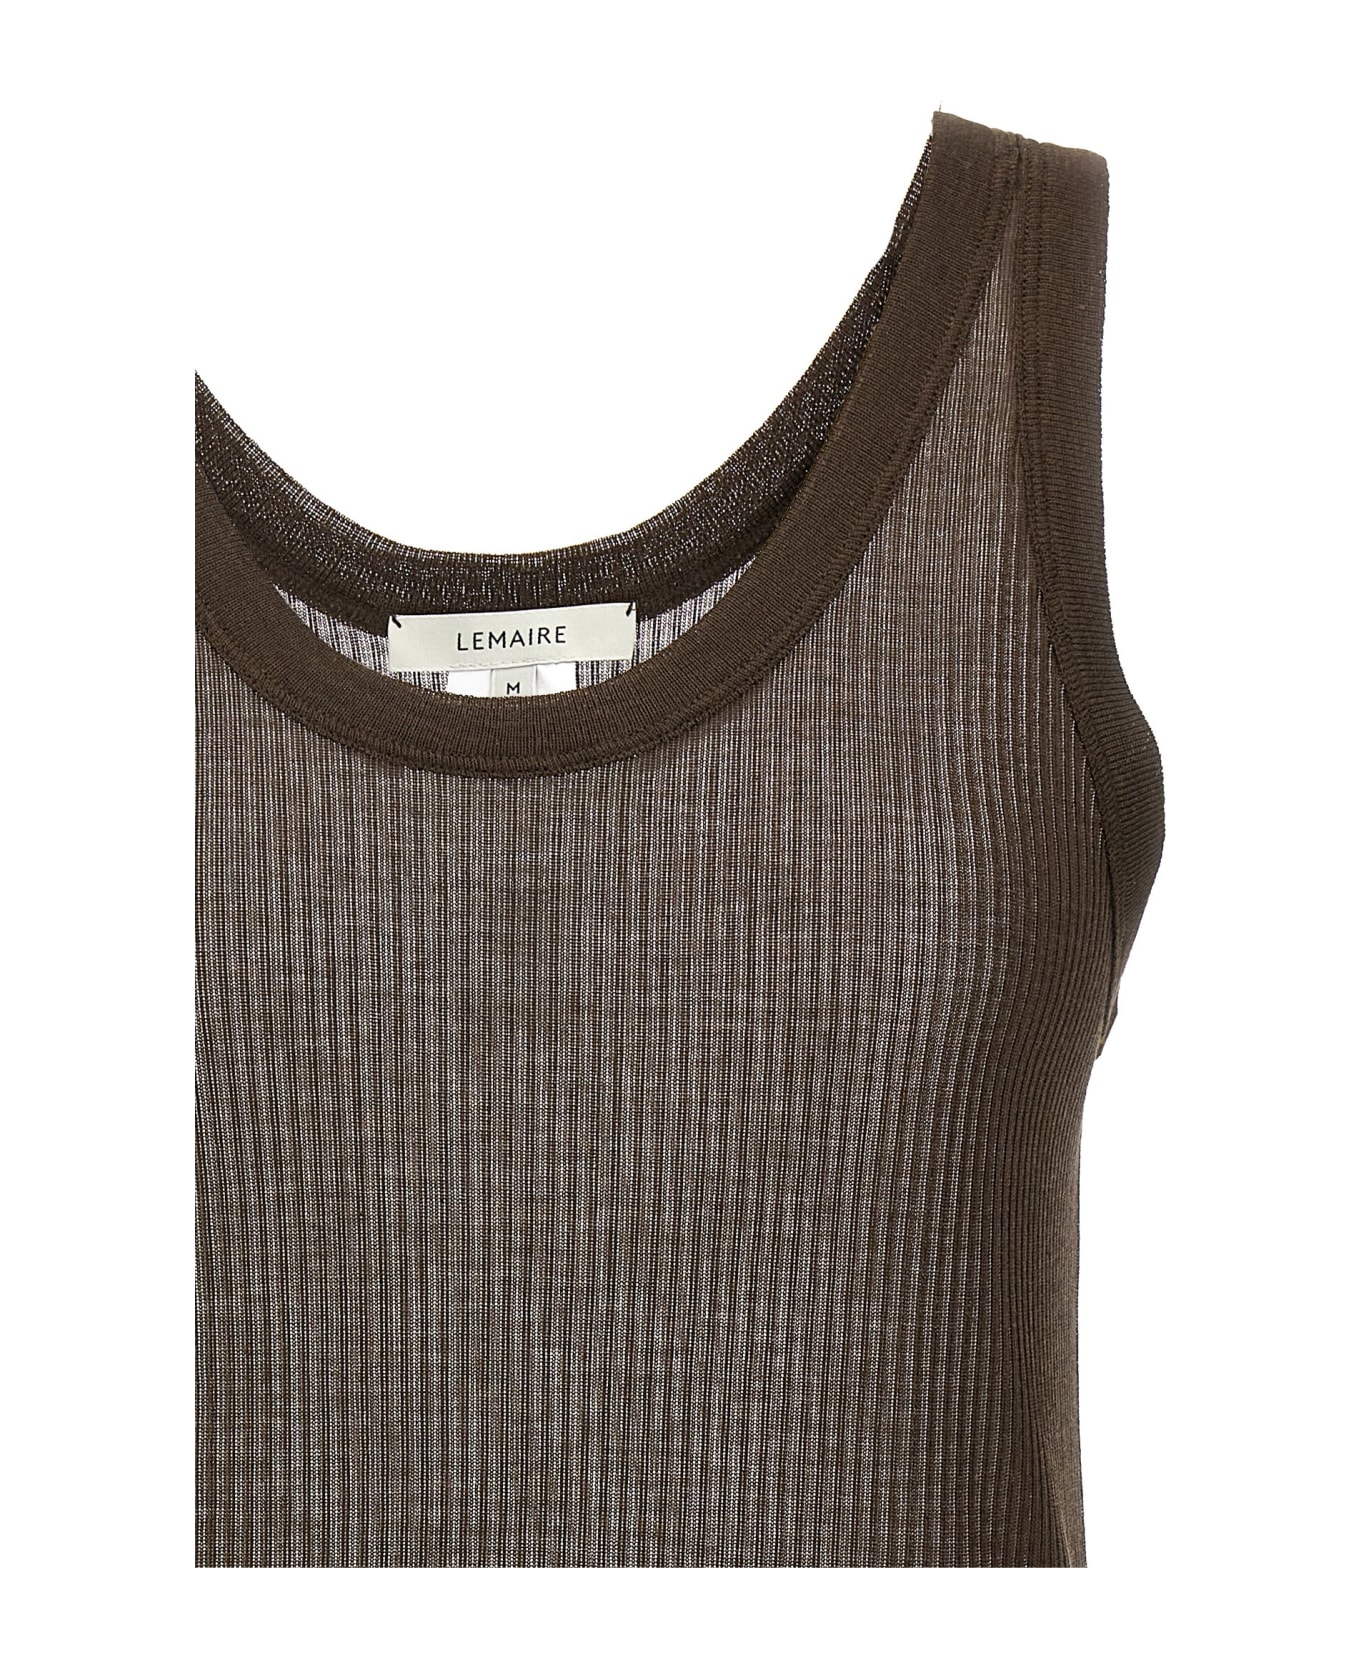 Lemaire 'seamless Rib' Tank Top - BROWN